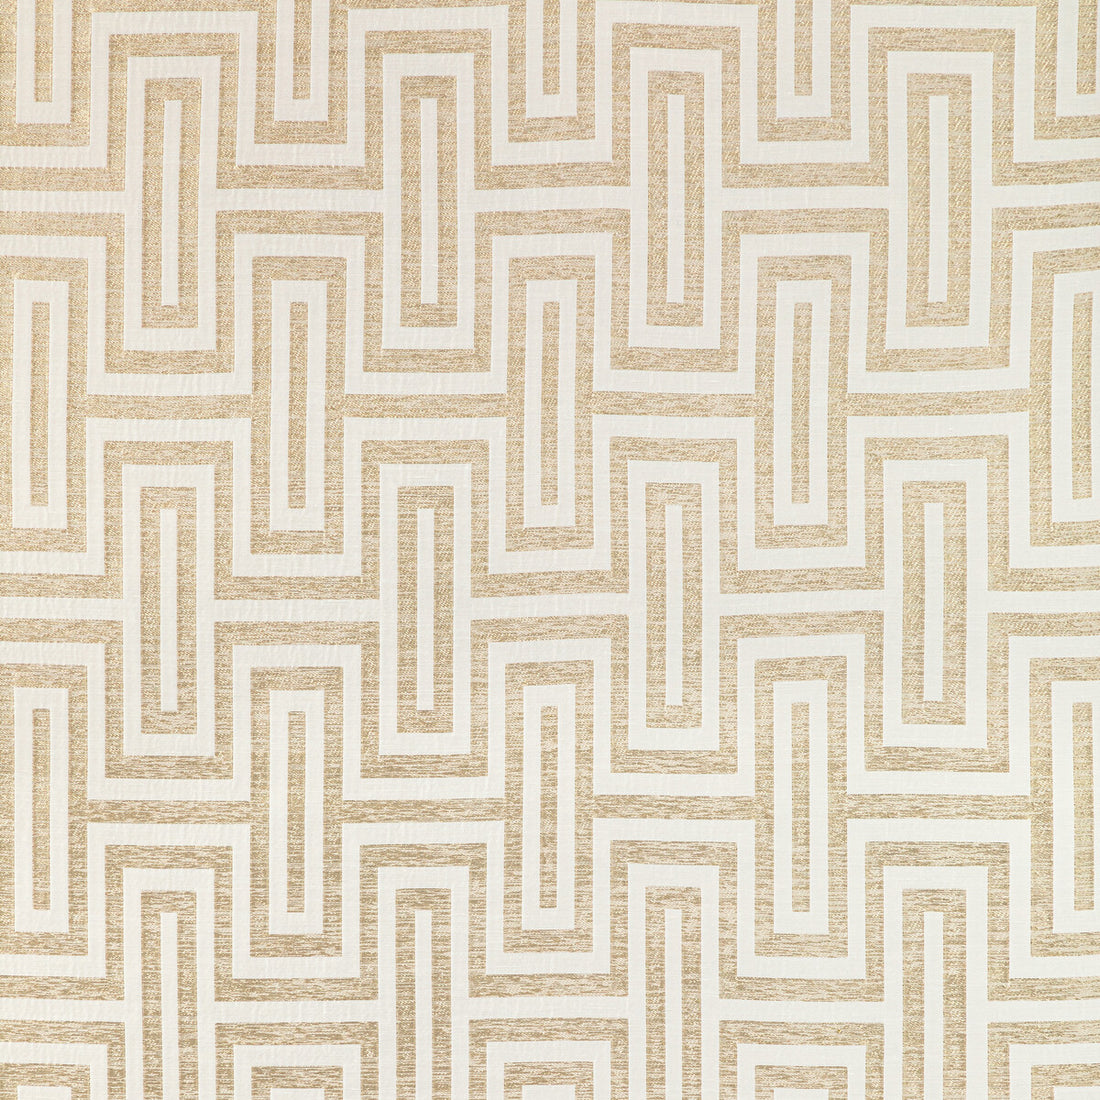 Geo Glam fabric in ivory gold color - pattern 36340.4.0 - by Kravet Couture in the Modern Luxe III collection